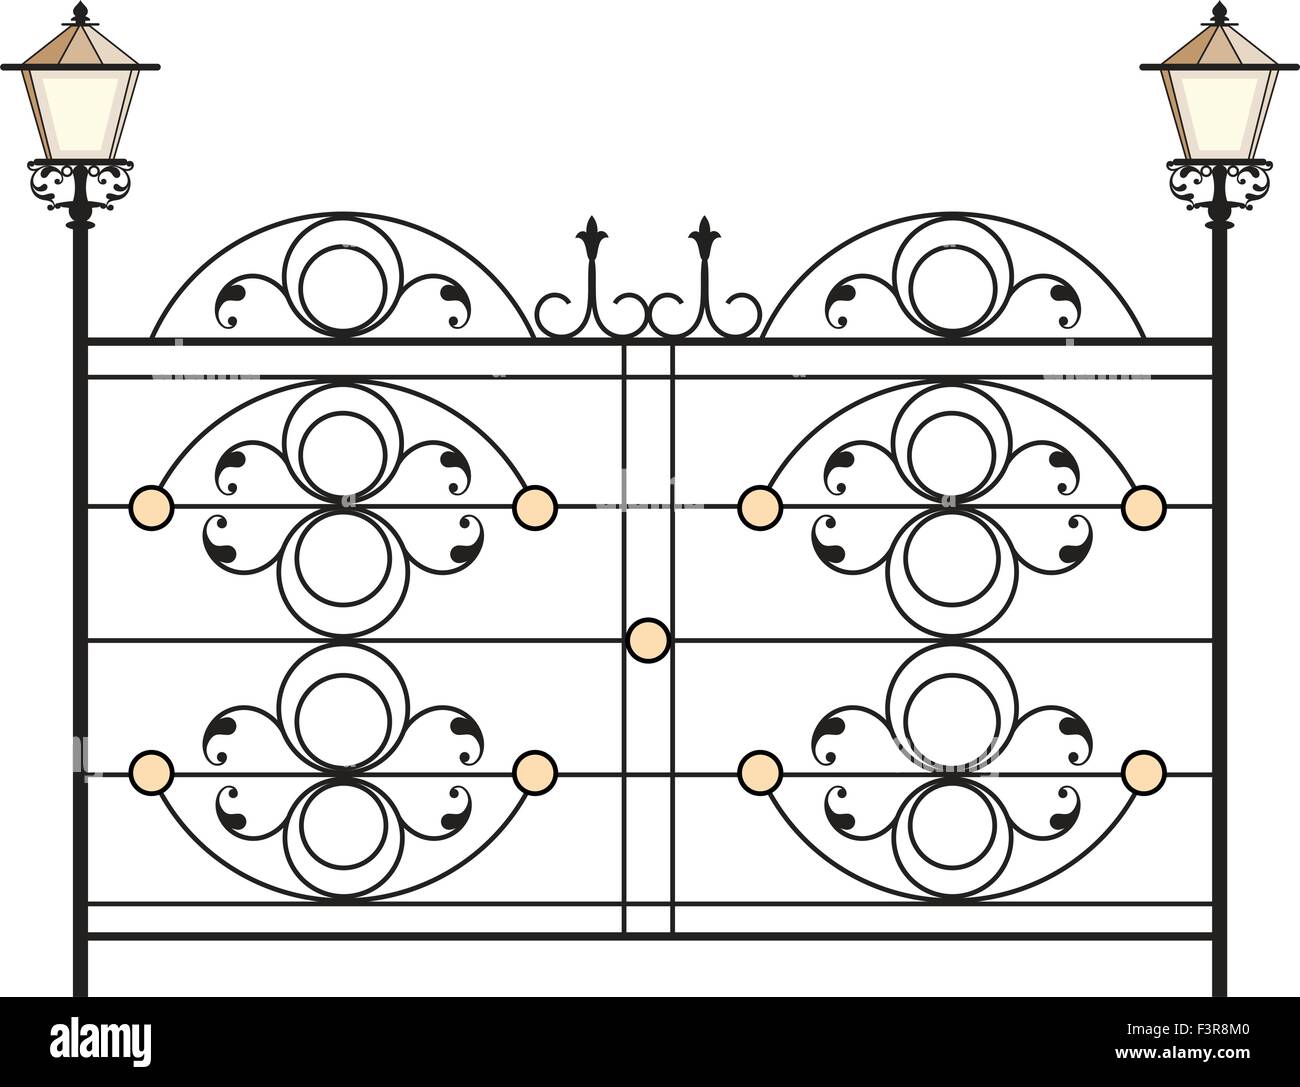 Wrought Iron Gate With Lamp Vector Art Stock Vector